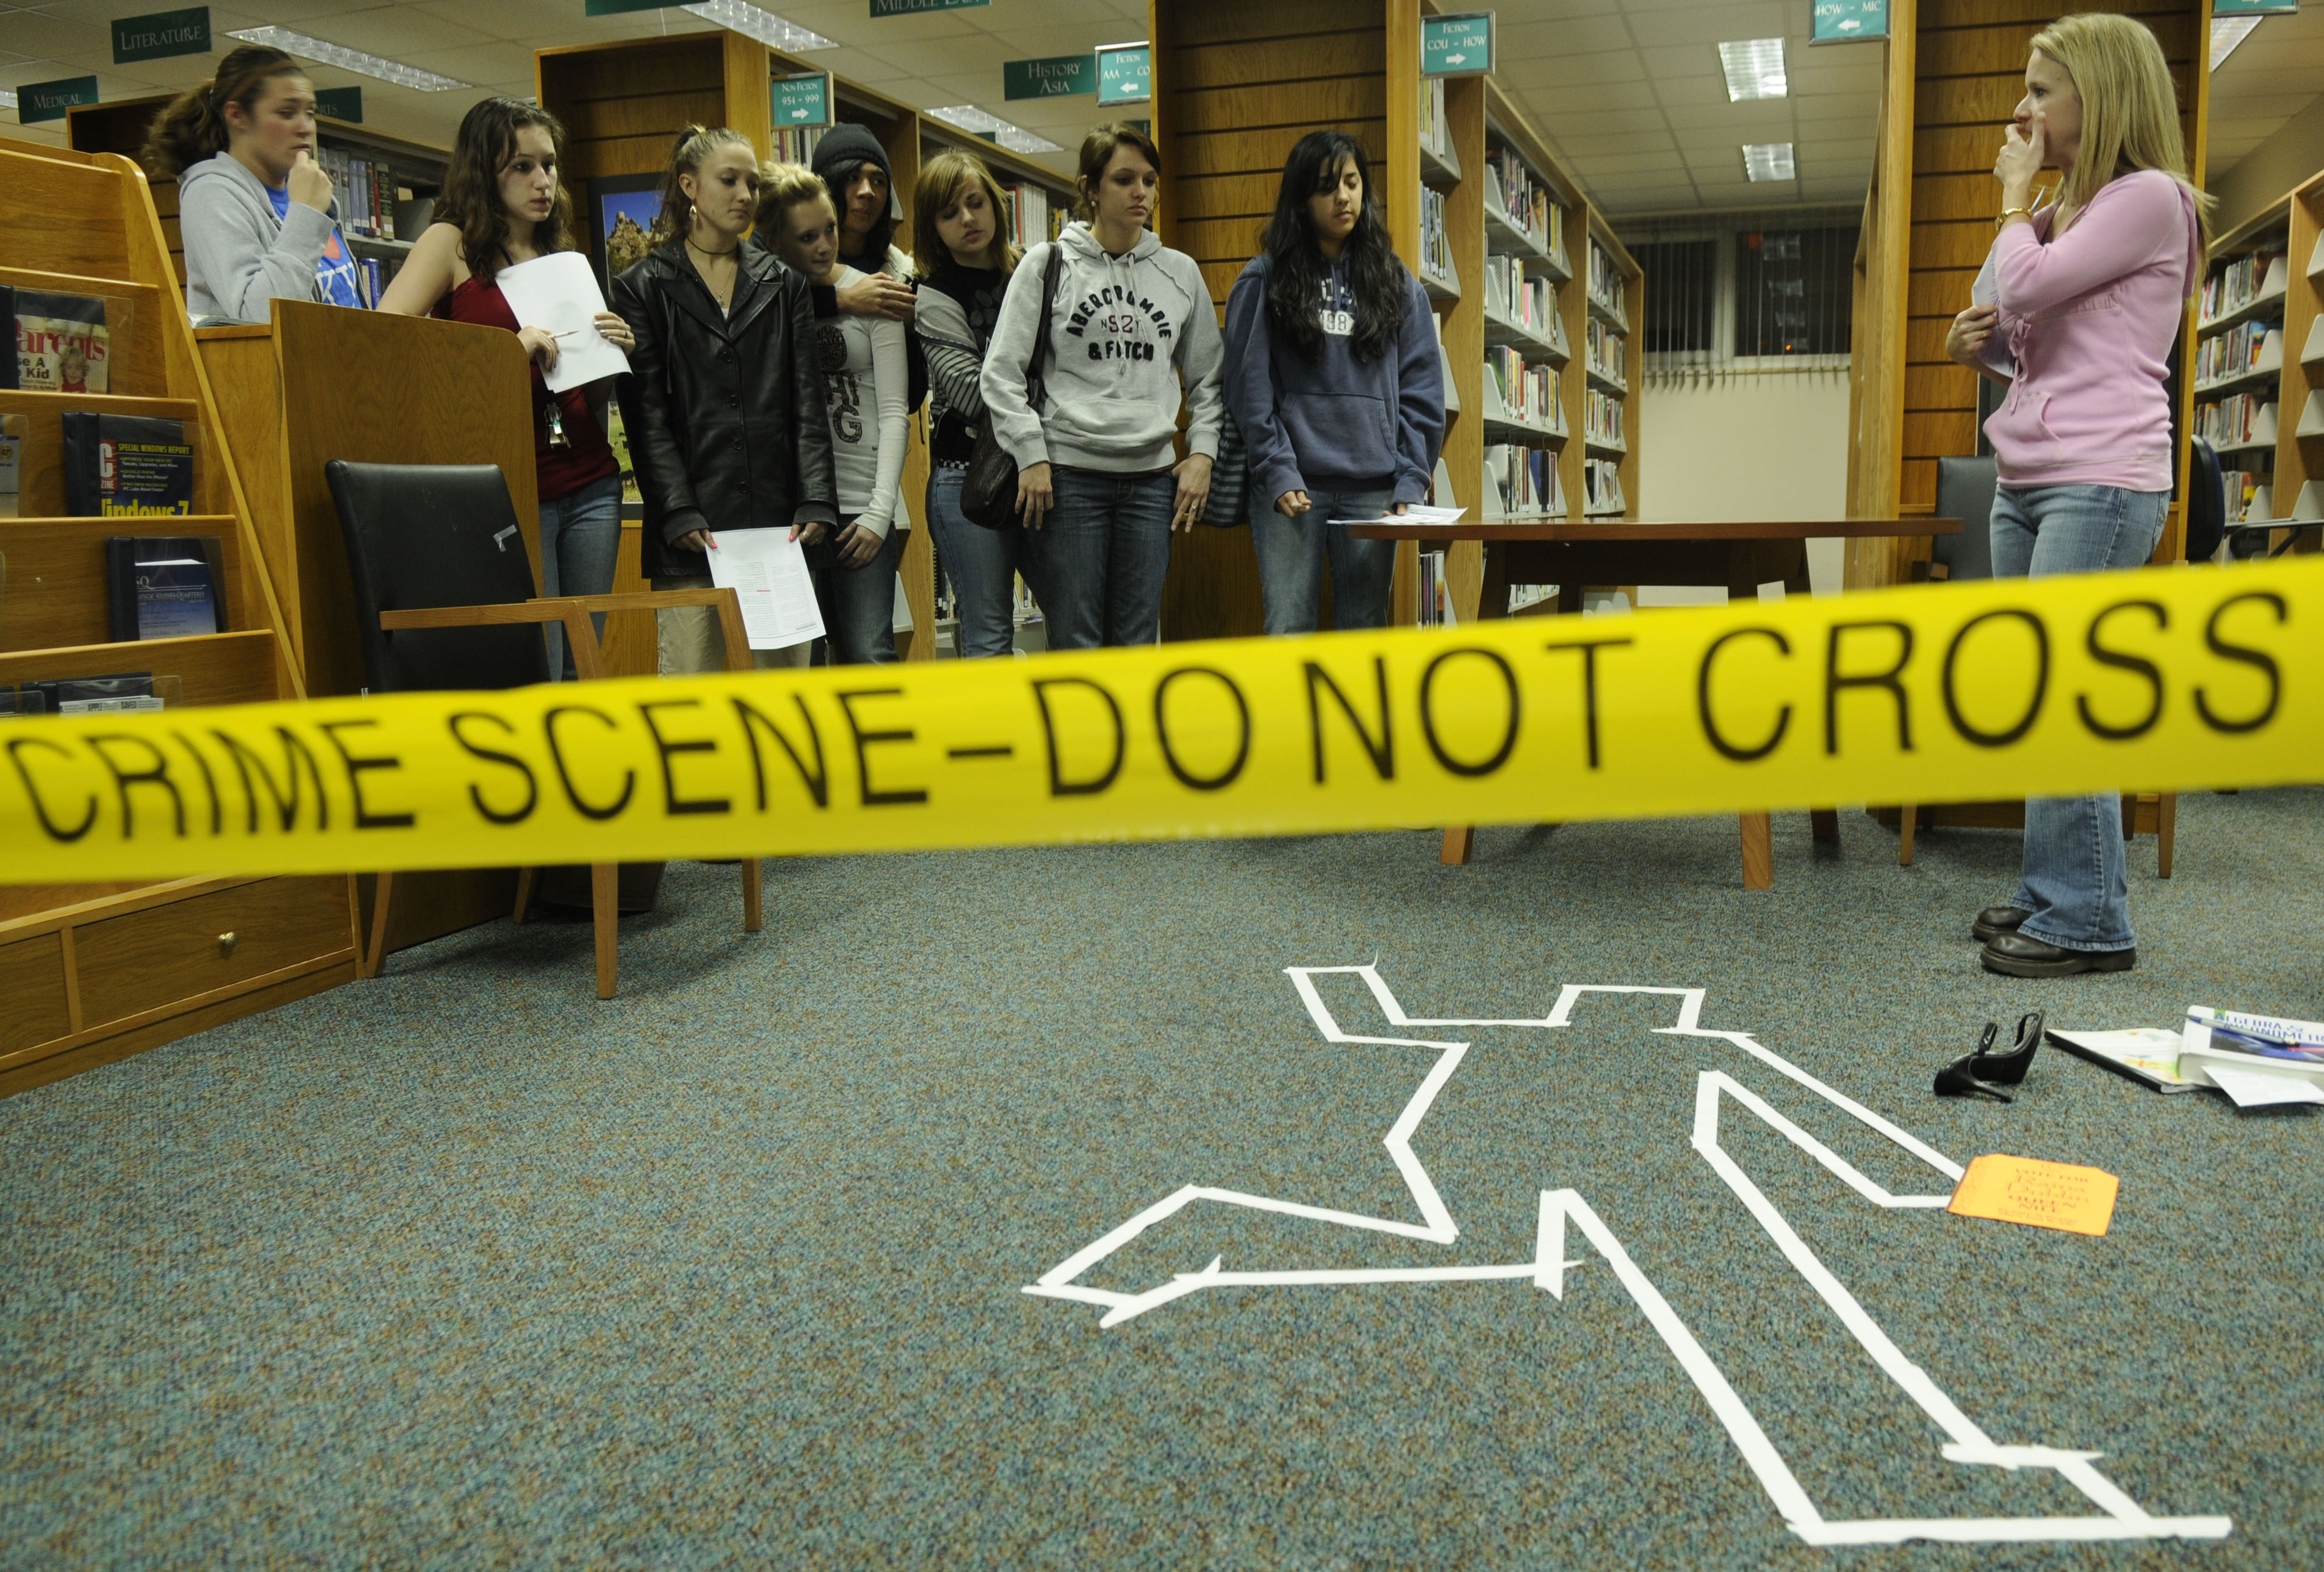 Group of people discussing a murder at a crime scene